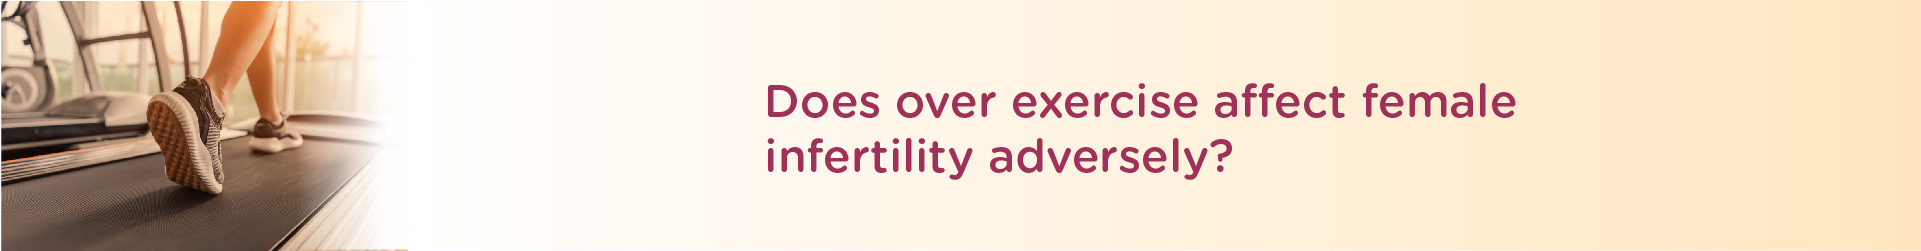 Does Over Exercise Affect Female Infertility Adversely?